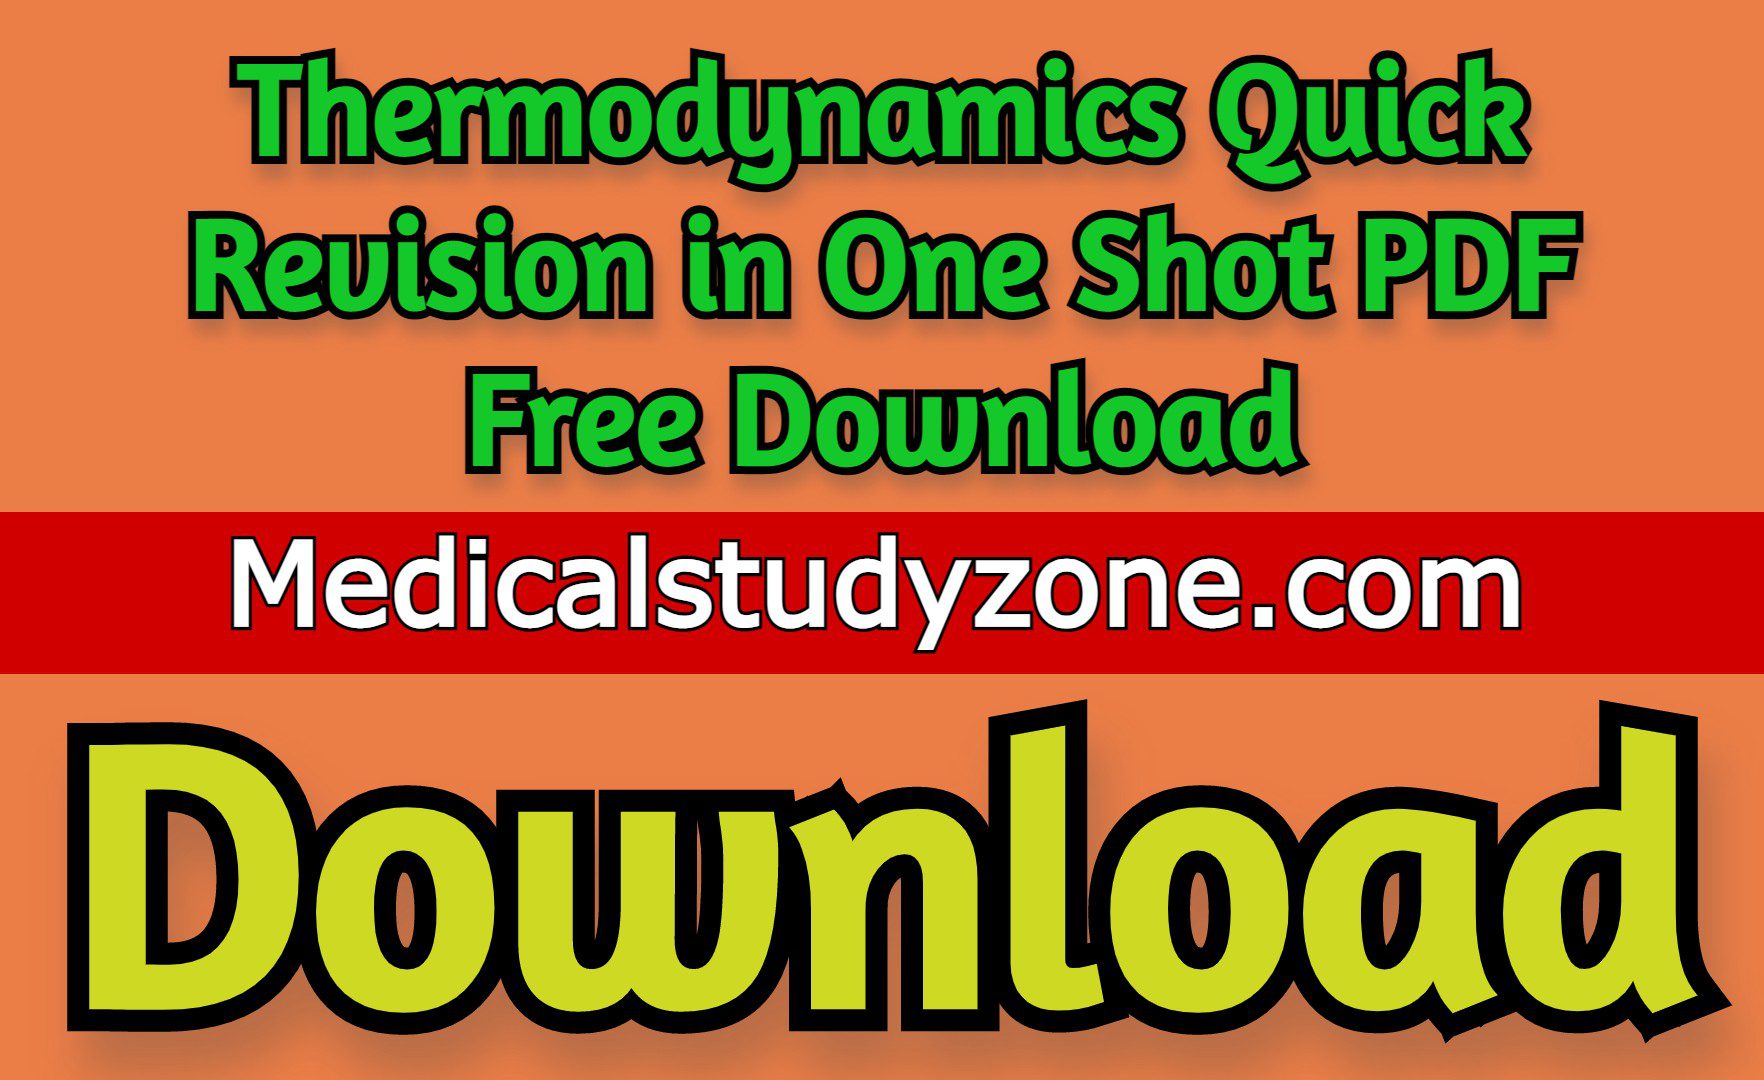 Thermodynamics Quick Revision in One Shot PDF Free Download